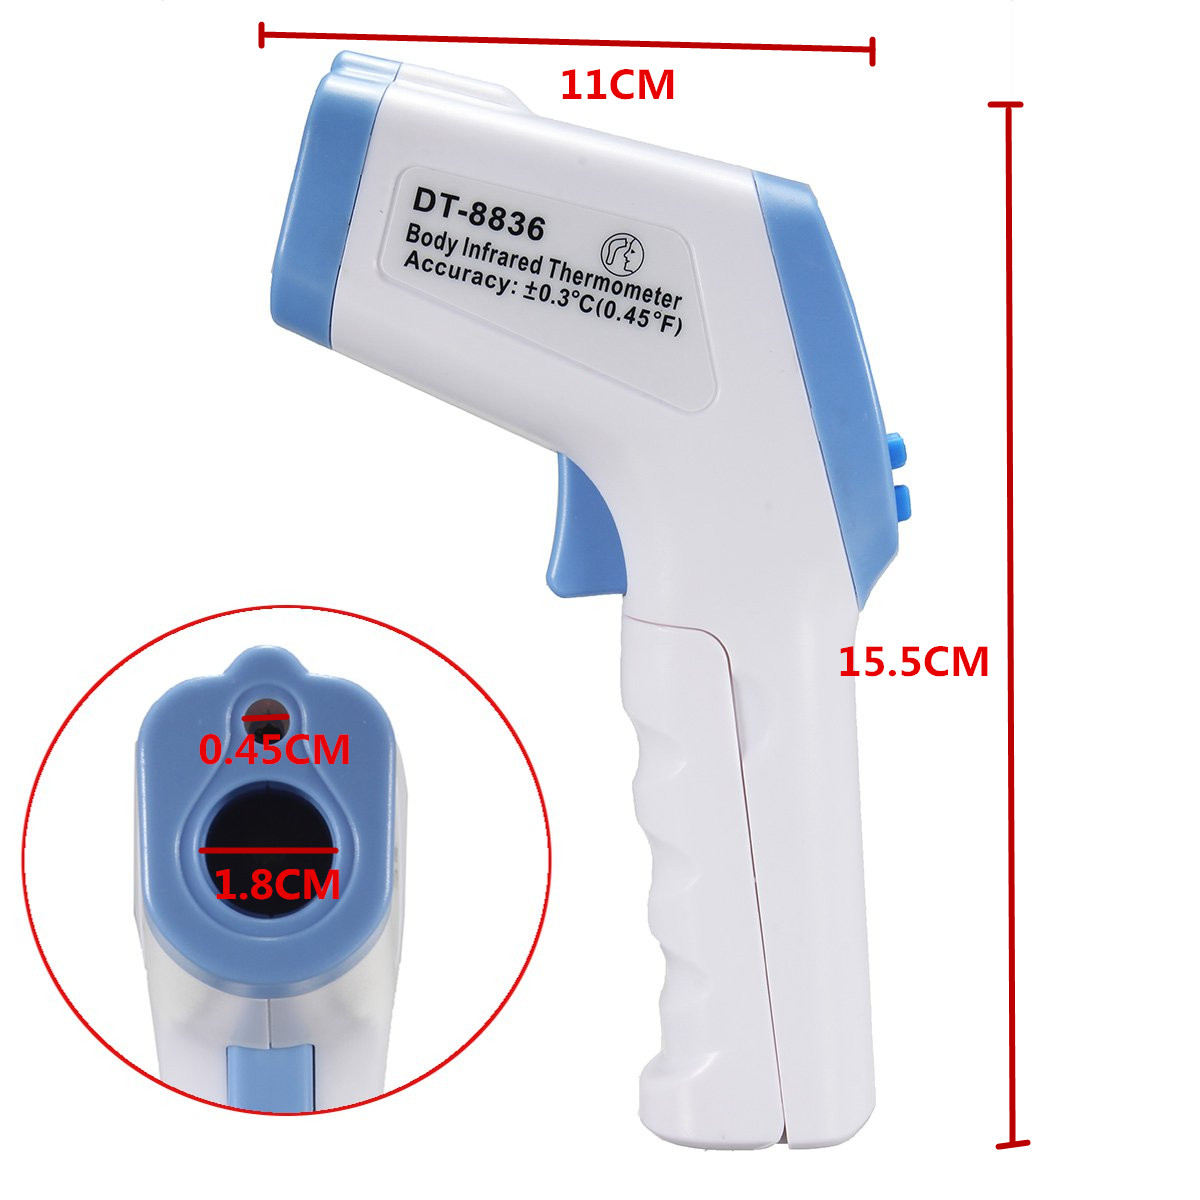 Digital-Non-Contact-No-Touch-Infrared-Forehead-Thermometer-DigitalThermometer-Measuring-Range-32-425-1132170-9